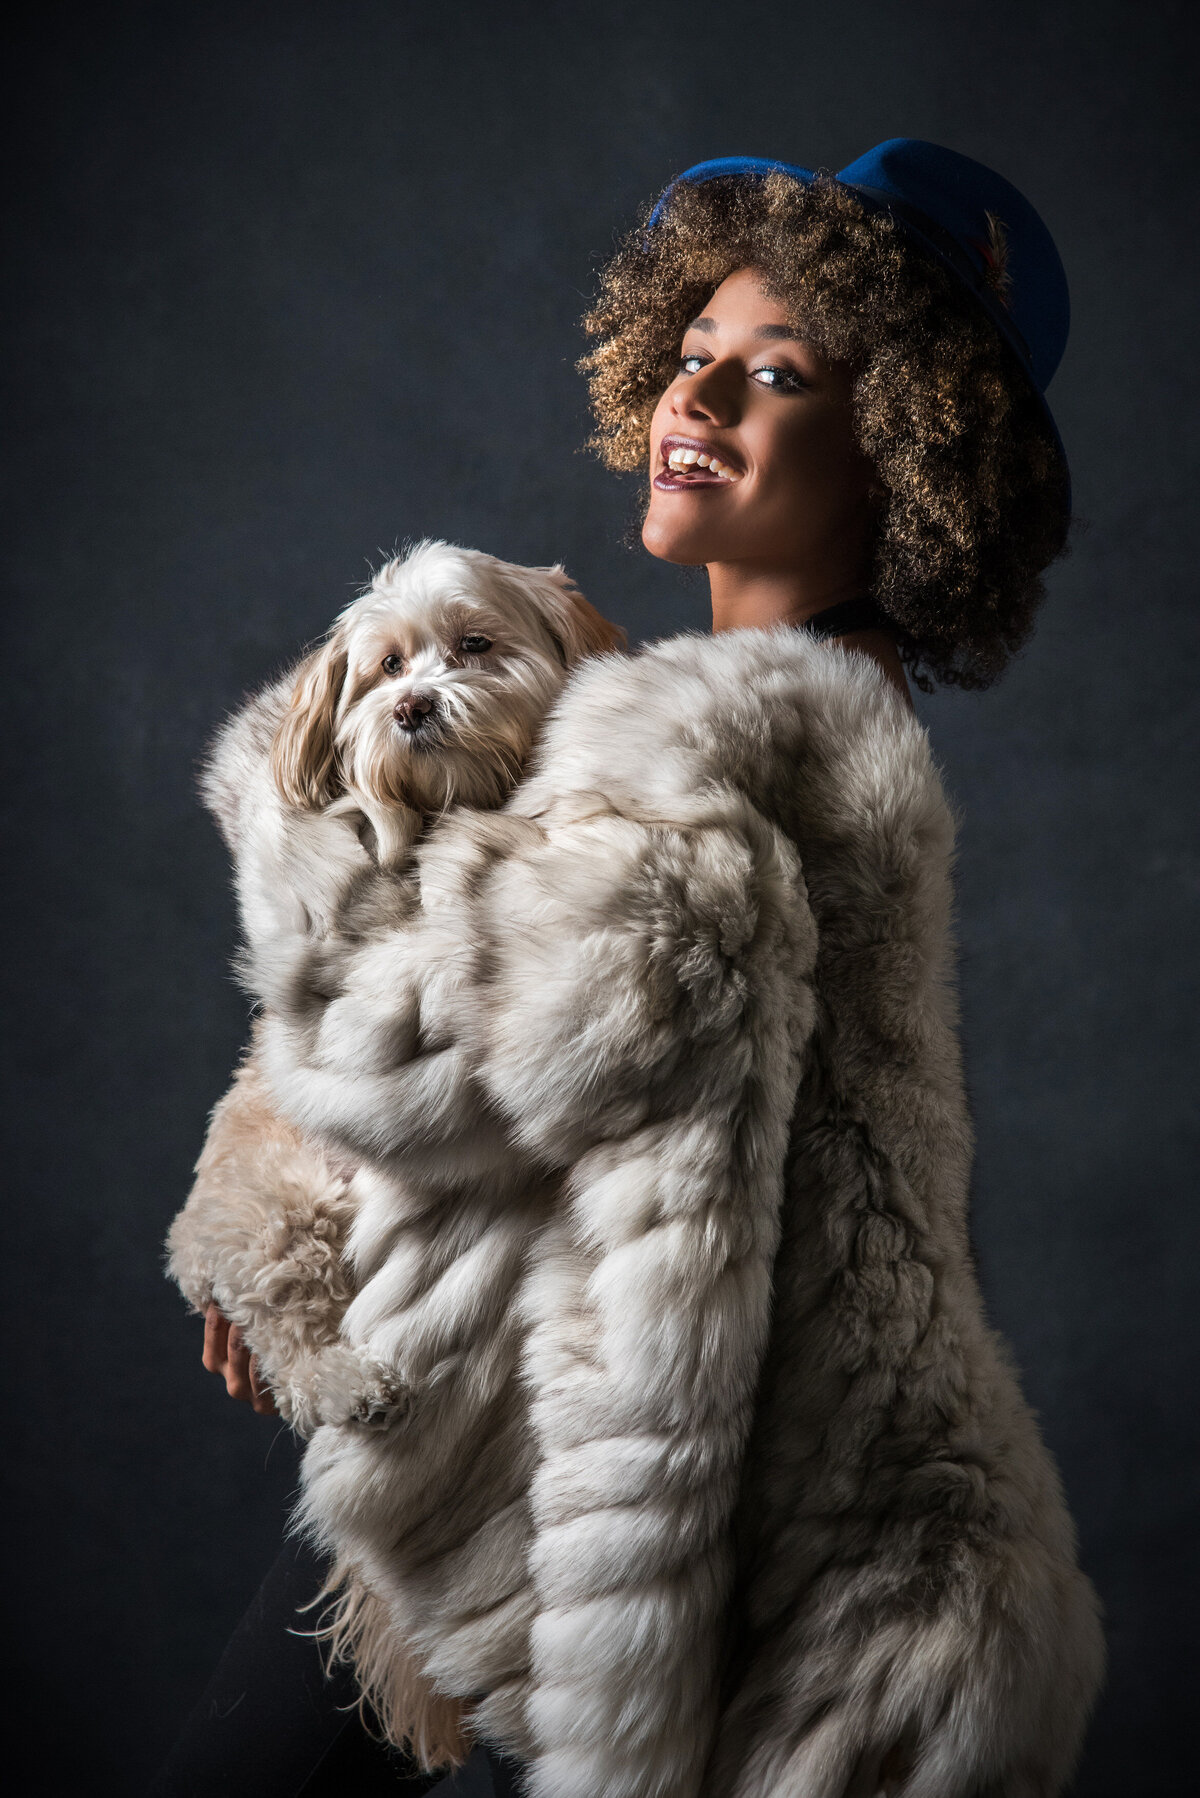 A woman in a fur coat holding a dog.